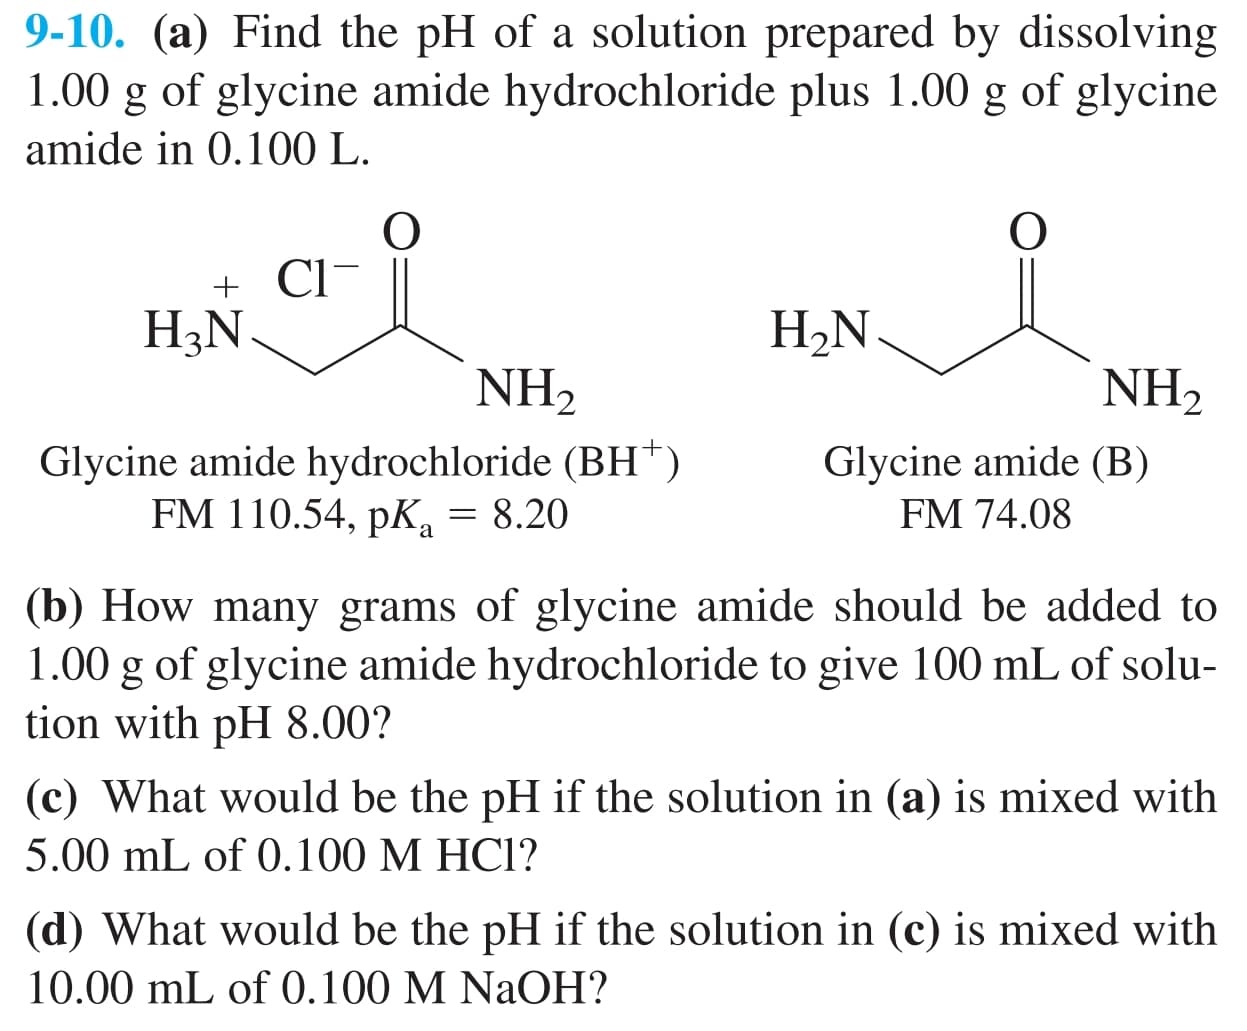 9-10. (a) Find the pH of a solution prepared by dissolving
1.00 g of glycine amide hydrochloride plus 1.00 g of glycine
amide in 0.100 L.
+ Cl-
H3N
H2N.
NH2
NH2
Glycine amide hydrochloride (BH†)
FM 110.54, pK, = 8.20
Glycine amide (B)
FM 74.08
(b) How many grams of glycine amide should be added to
1.00 g of glycine amide hydrochloride to give 100 mL of solu-
tion with pH 8.00?
(c) What would be the pH if the solution in (a) is mixed with
5.00 mL of 0.100 M HC1?
(d) What would be the pH if the solution in (c) is mixed with
10.00 mL of 0.100 M NaOH?
